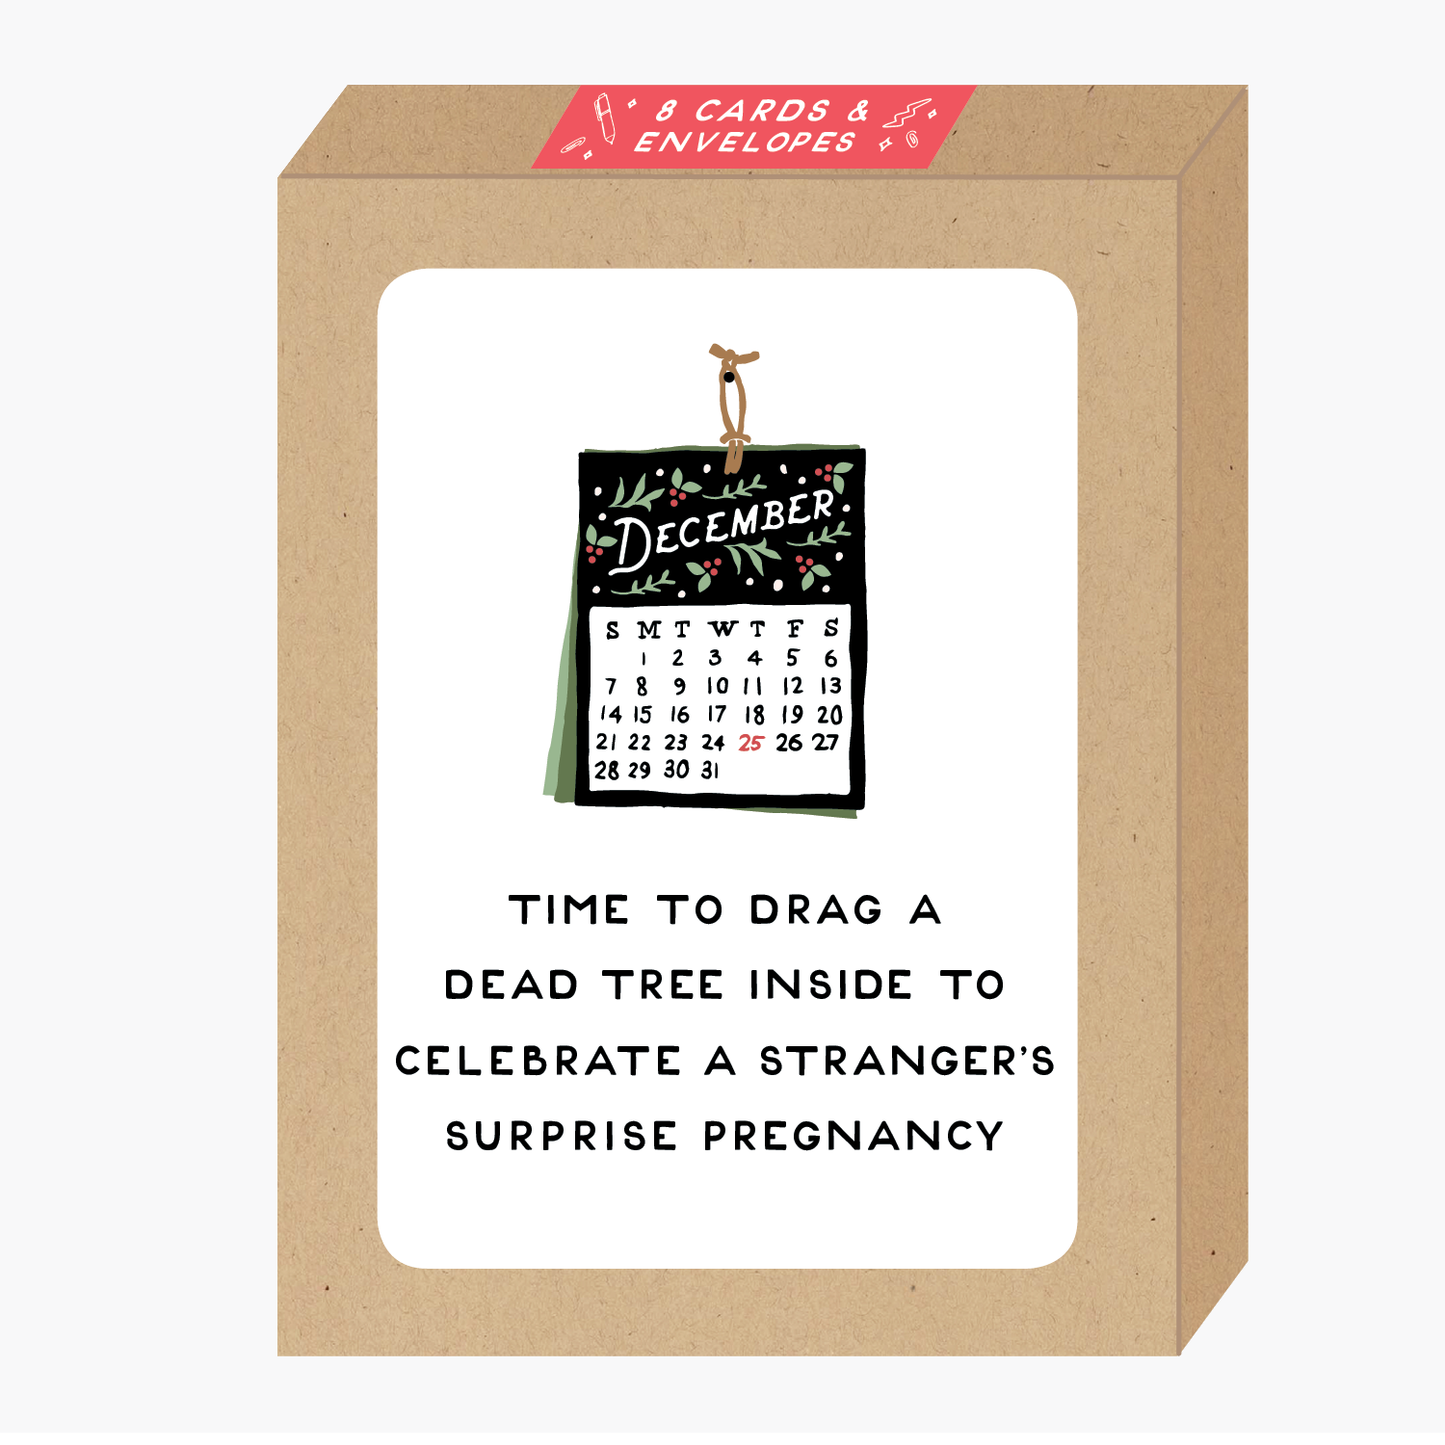 Boxed Surprise Pregnancy Holiday Cards